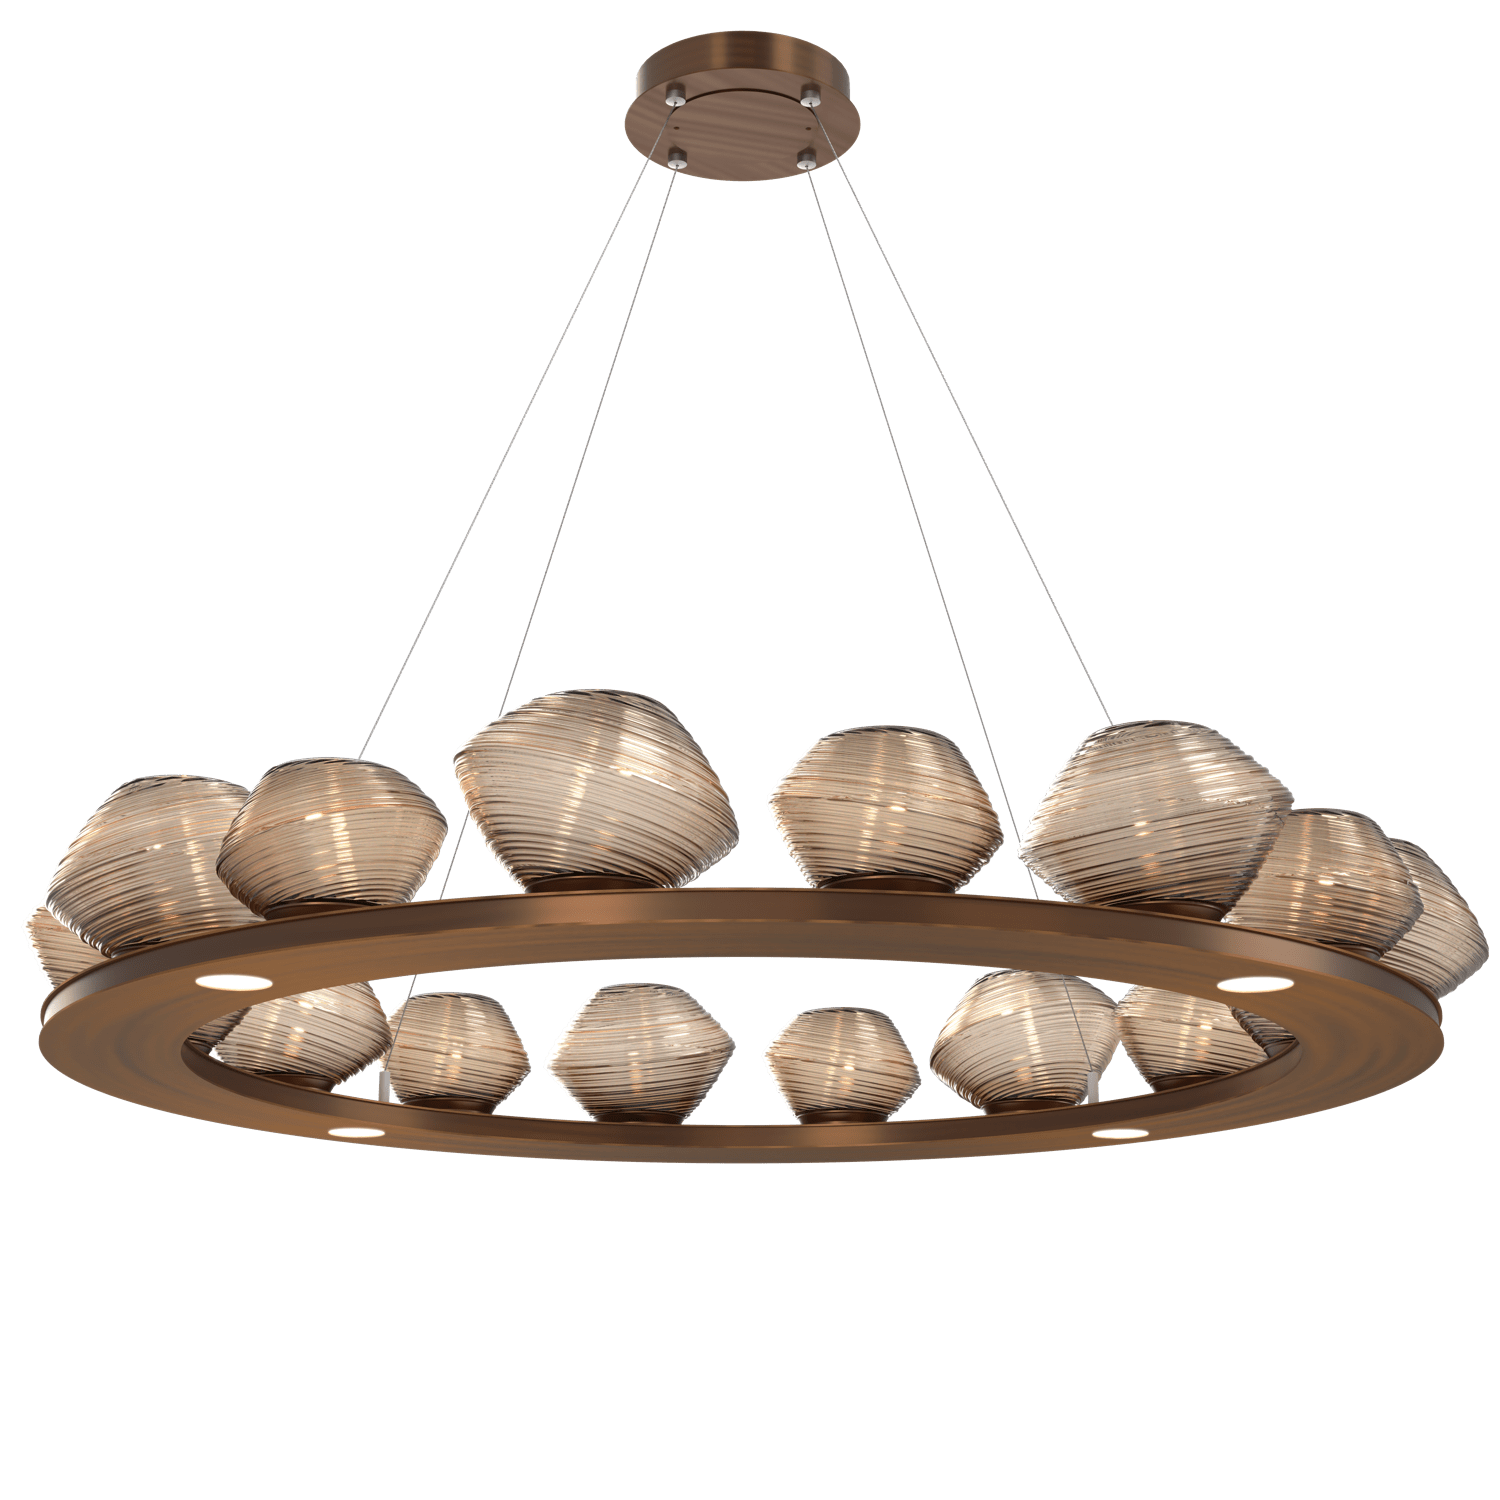 CHB0089-0D-RB-B-Hammerton-Studio-Mesa-48-inch-ring-chandelier-with-oil-rubbed-bronze-finish-and-bronze-blown-glass-shades-and-LED-lamping